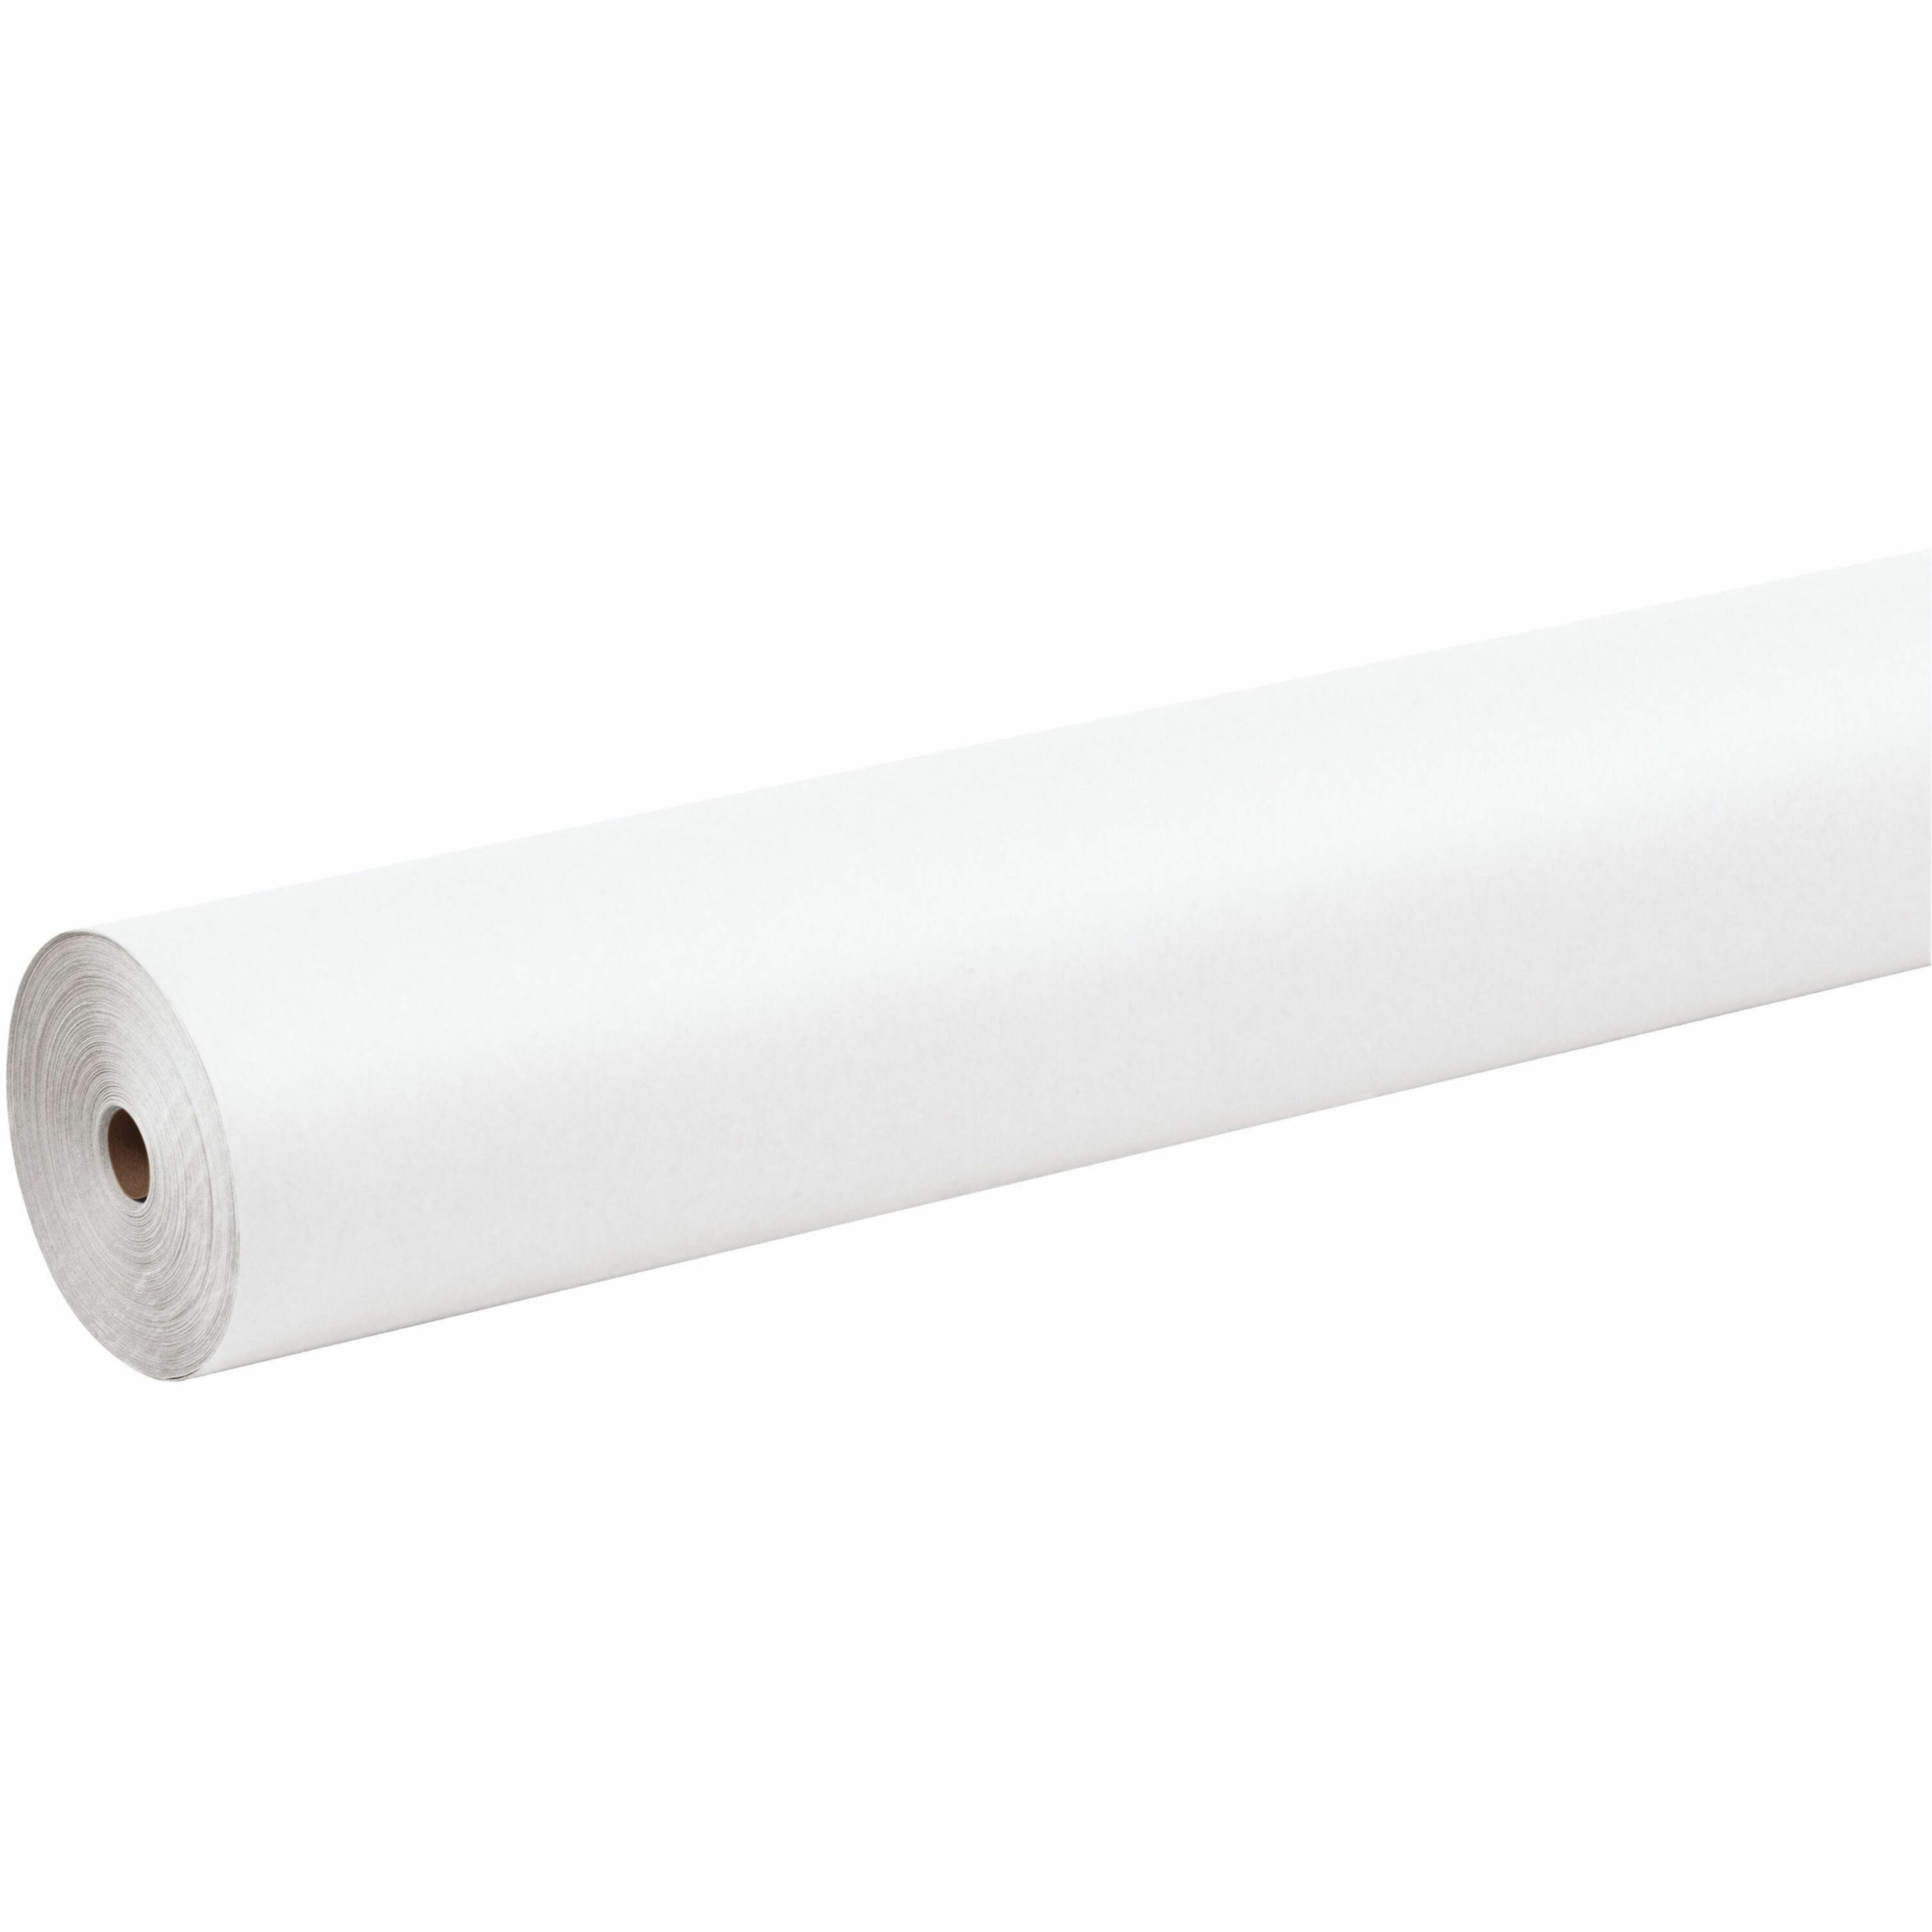 pacon-antimicrobial-paper-rolls-school-drawing-banner-display-office-restaurant-sketching-48width-x-200-ftlength-1-roll-white-paper_pacp1050101 - 1